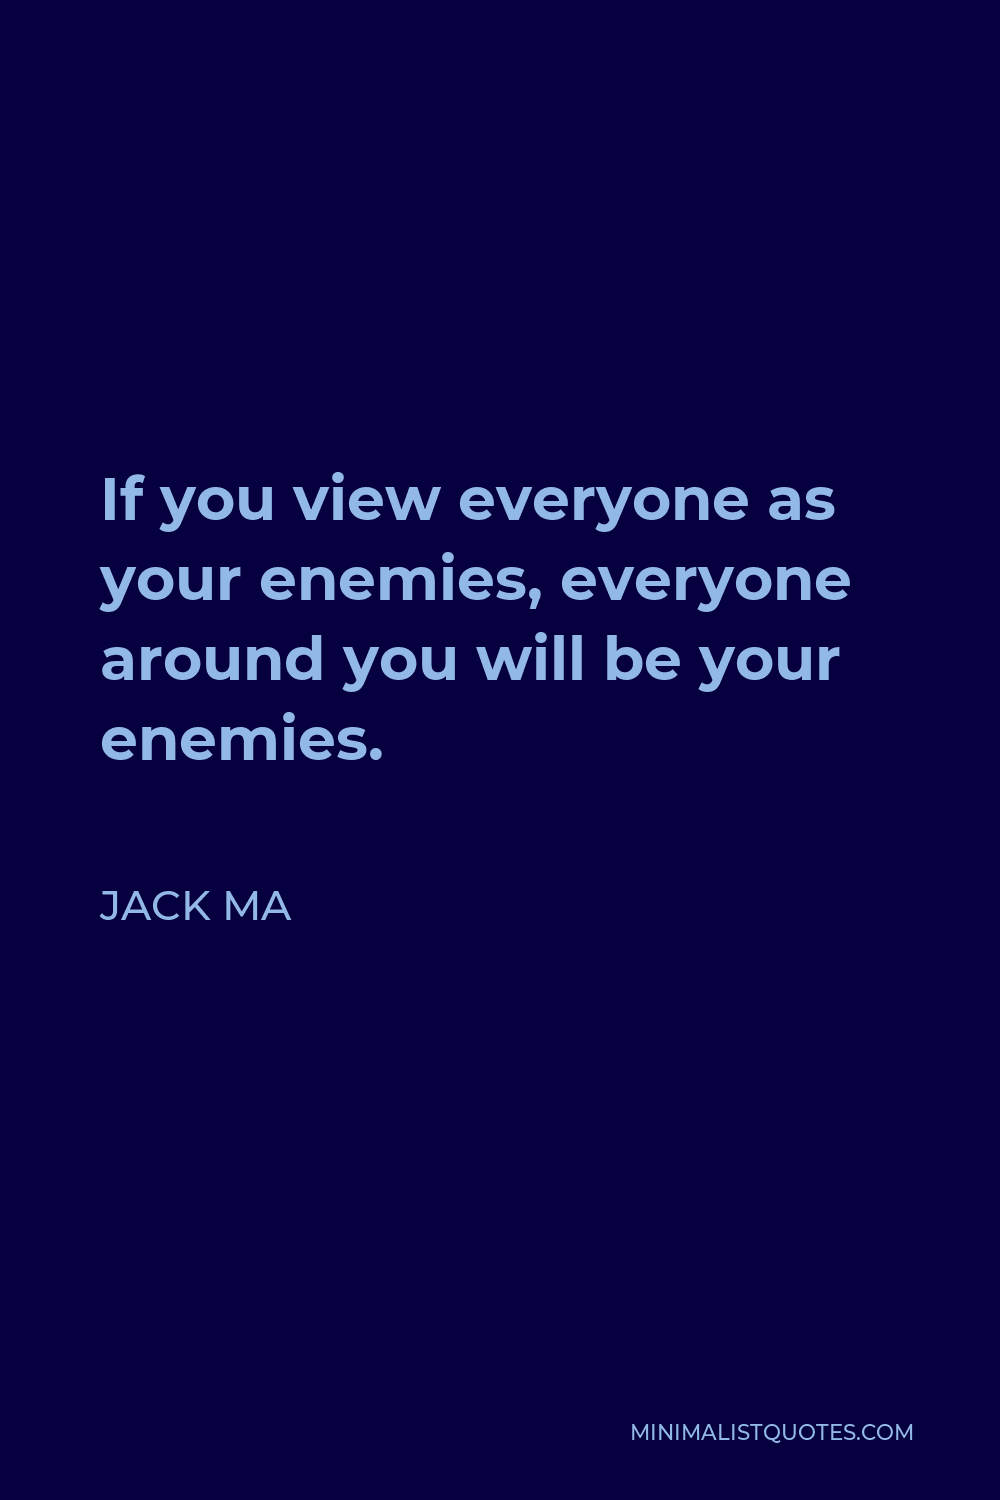 Jack Ma Quote - If you view everyone as your enemies, everyone around you will be your enemies.